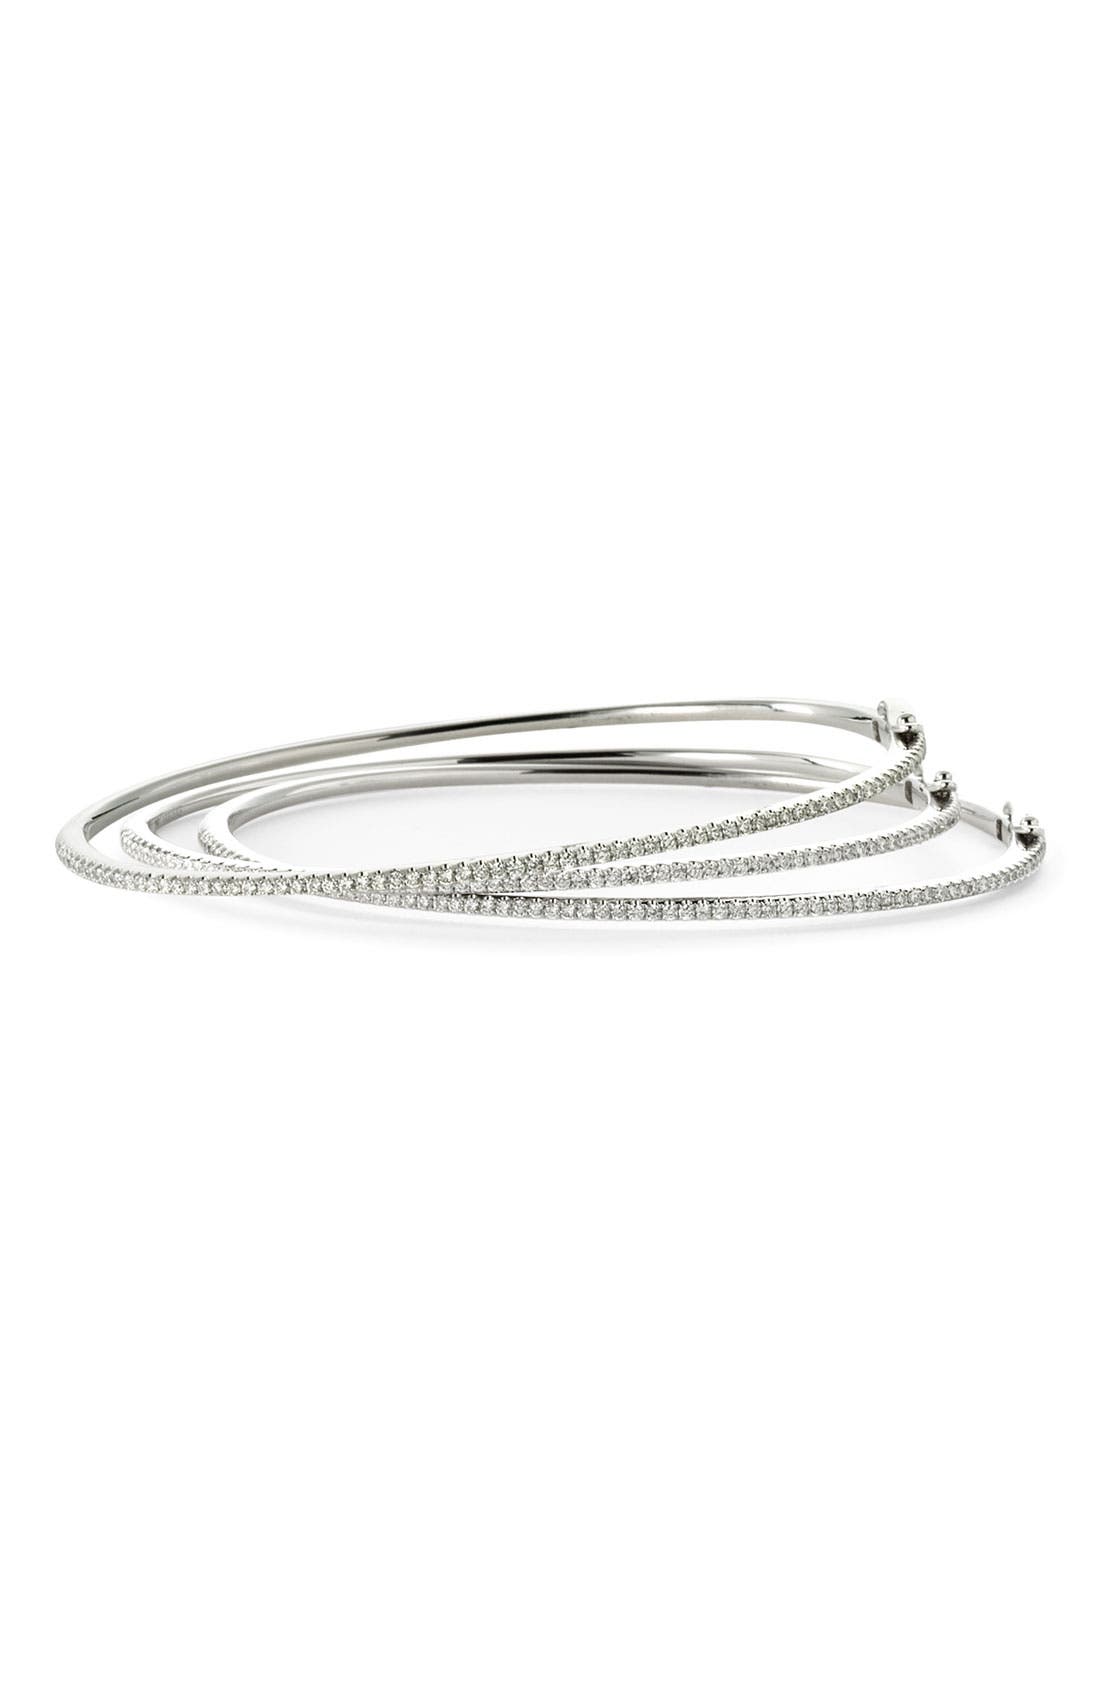 Bony Levy Skinny Stackable Diamond Bangle In White Gold At Nordstrom, Size 7 Us